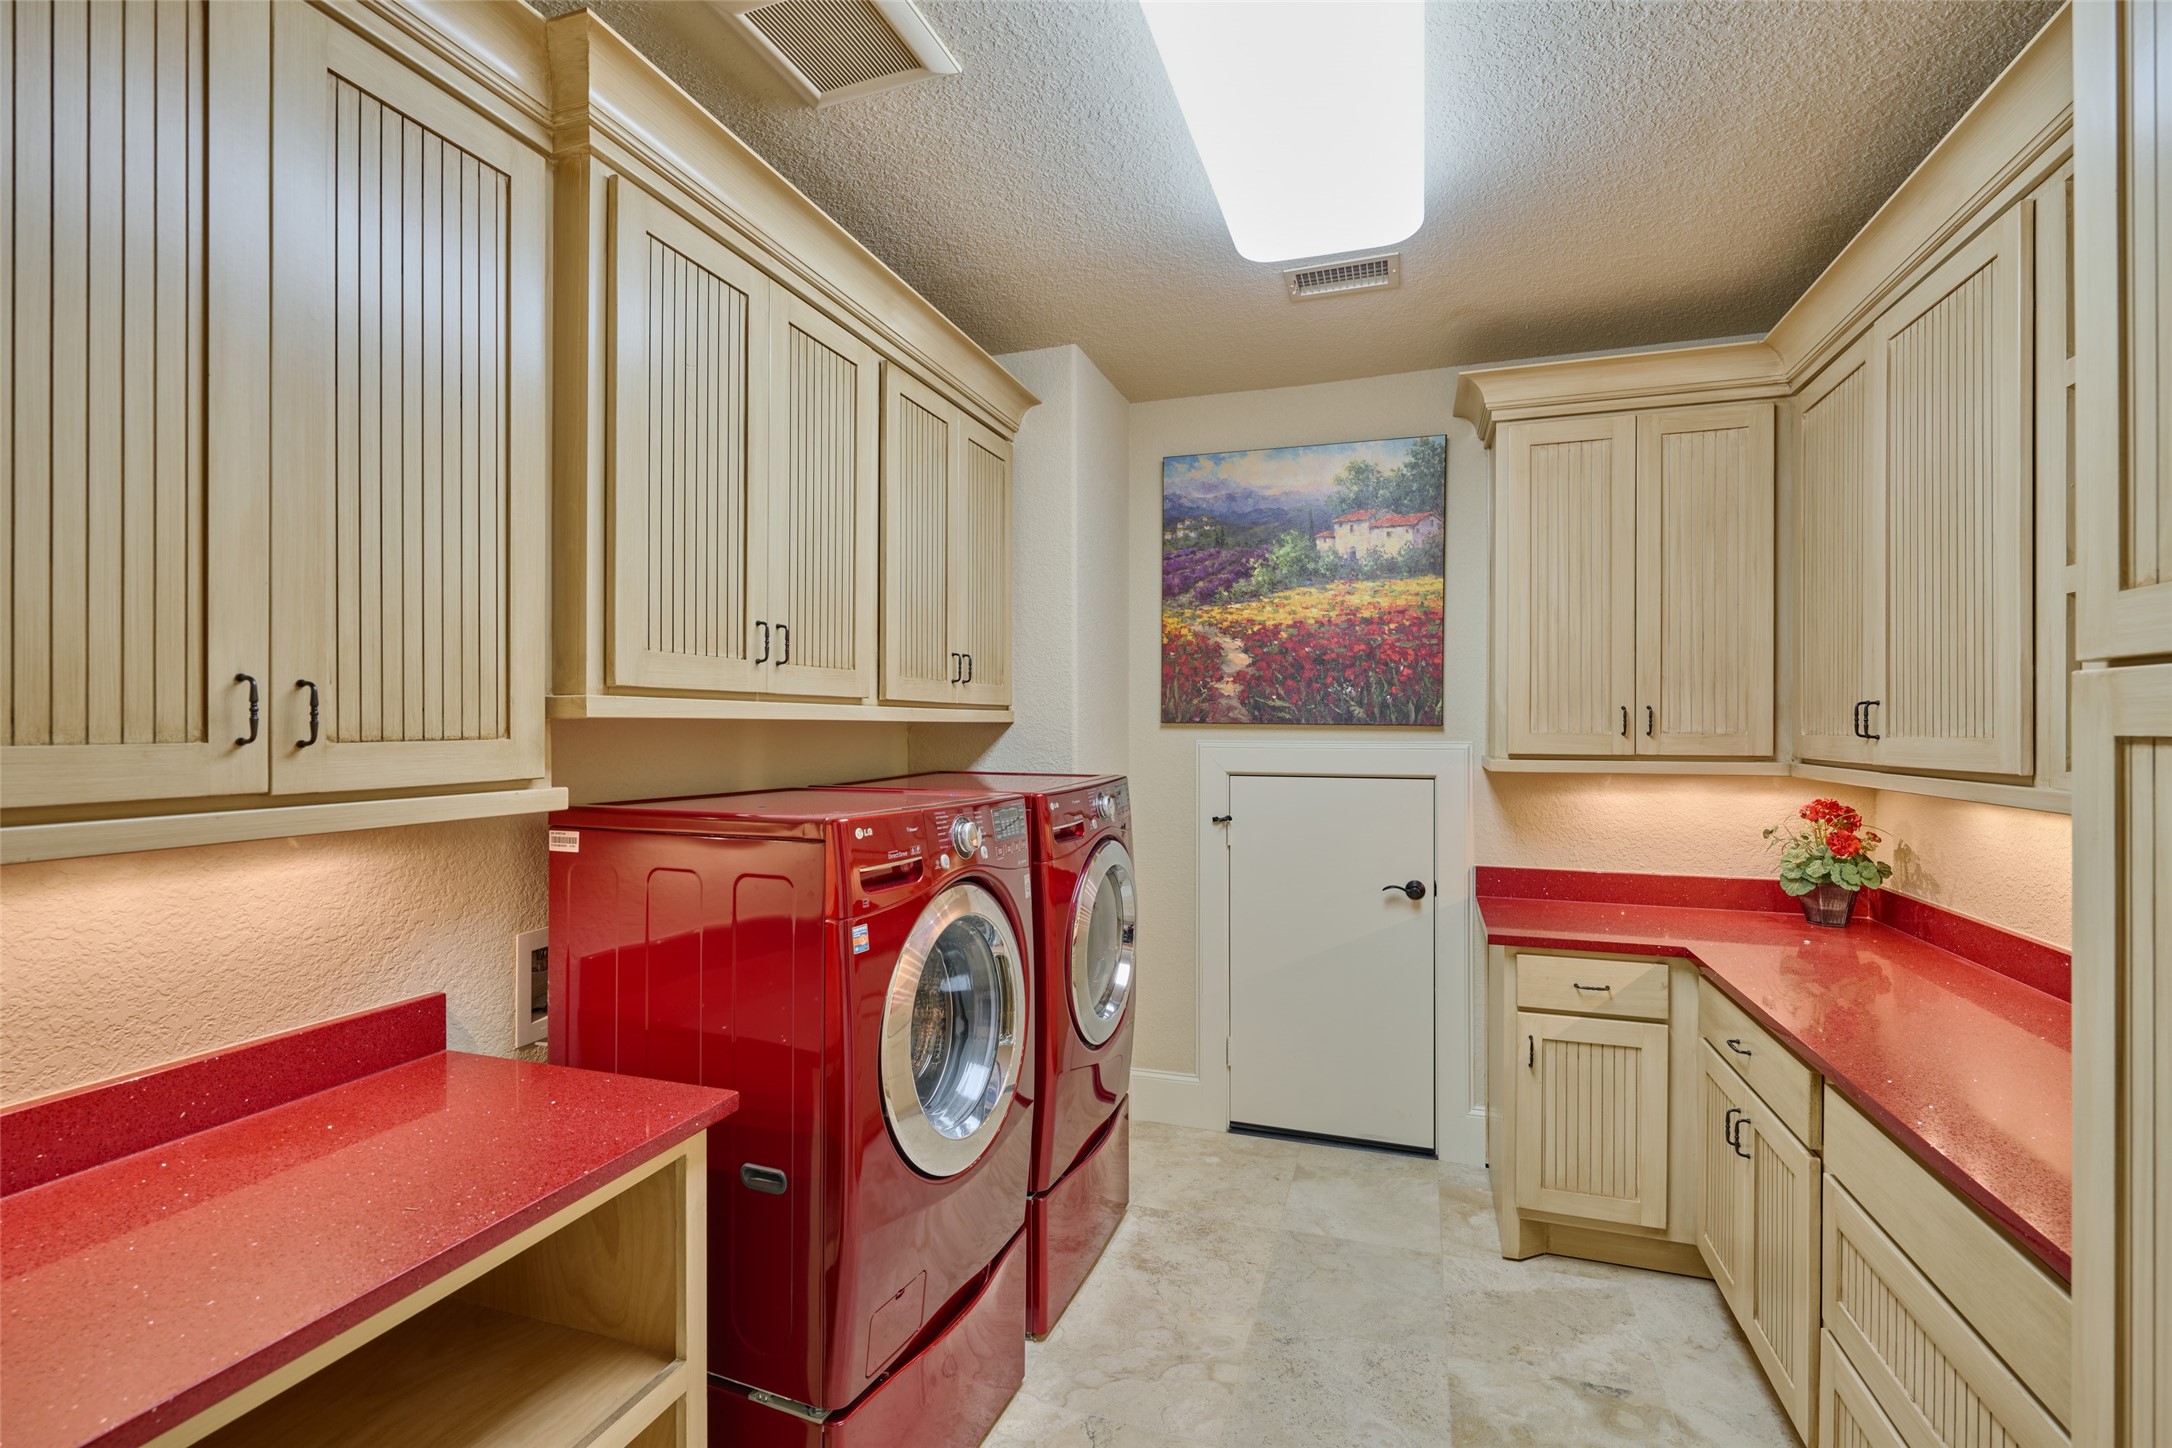 The three bedrooms upstairs have their own full size laundry room, red sparkling granite counters for plenty of folding space, lots of storage cabinets, and an attic access door, polished travertine marble floors, red washer/dryer, on pedastols, barely used, included in sale.